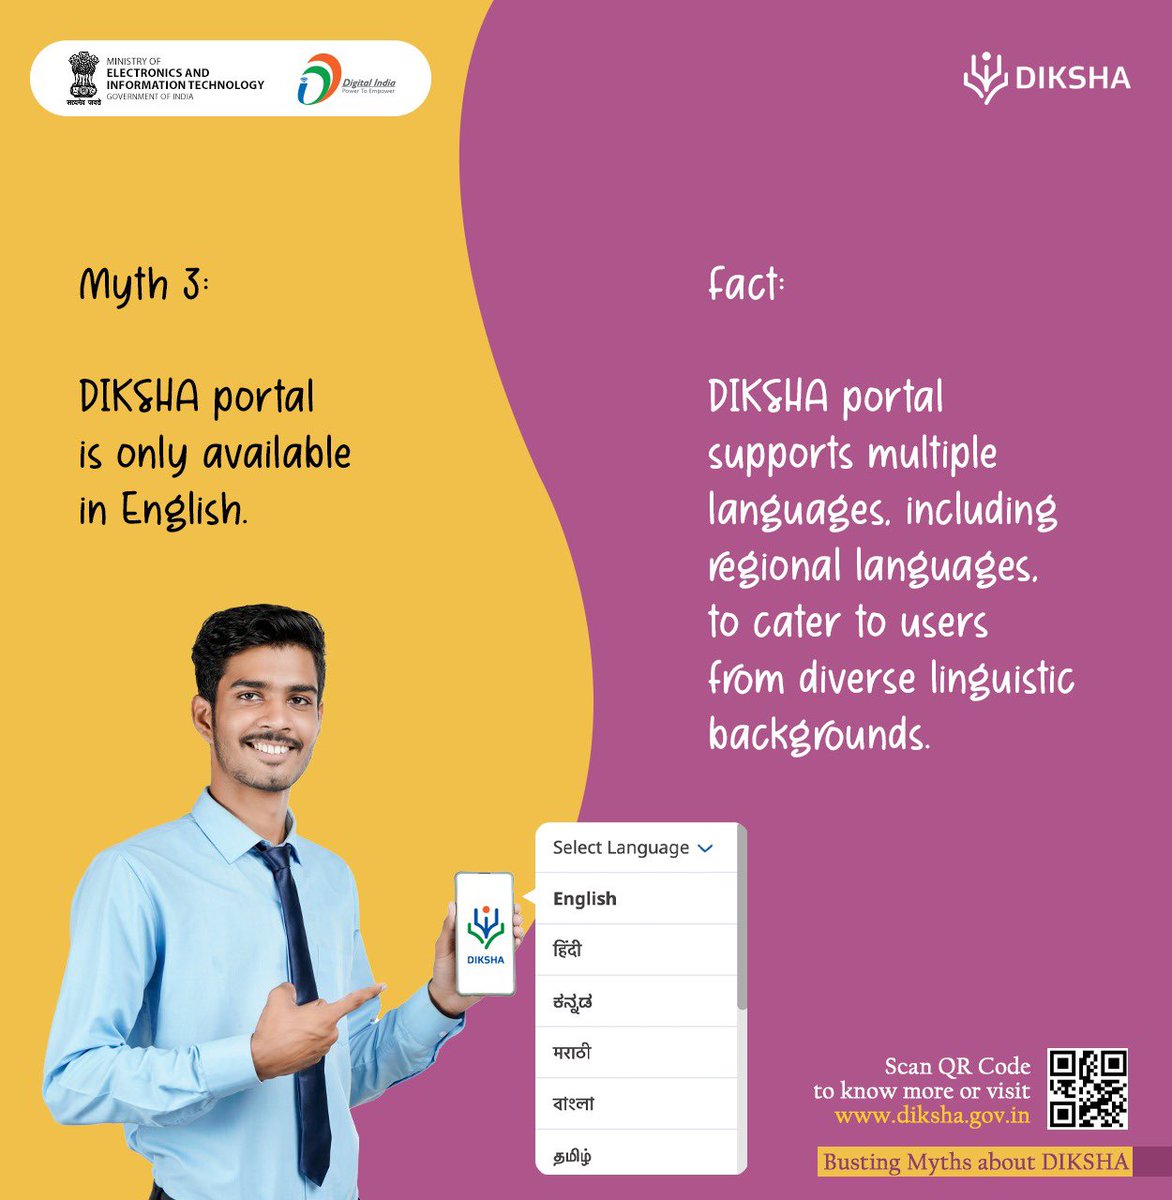 Language is not a barrier to using the DIKSHA portal! Now get access to education in regional languages. Visit diksha.gov.in #DigitalIndia #eLearning @EduMinOfIndia @DselEduMinistry